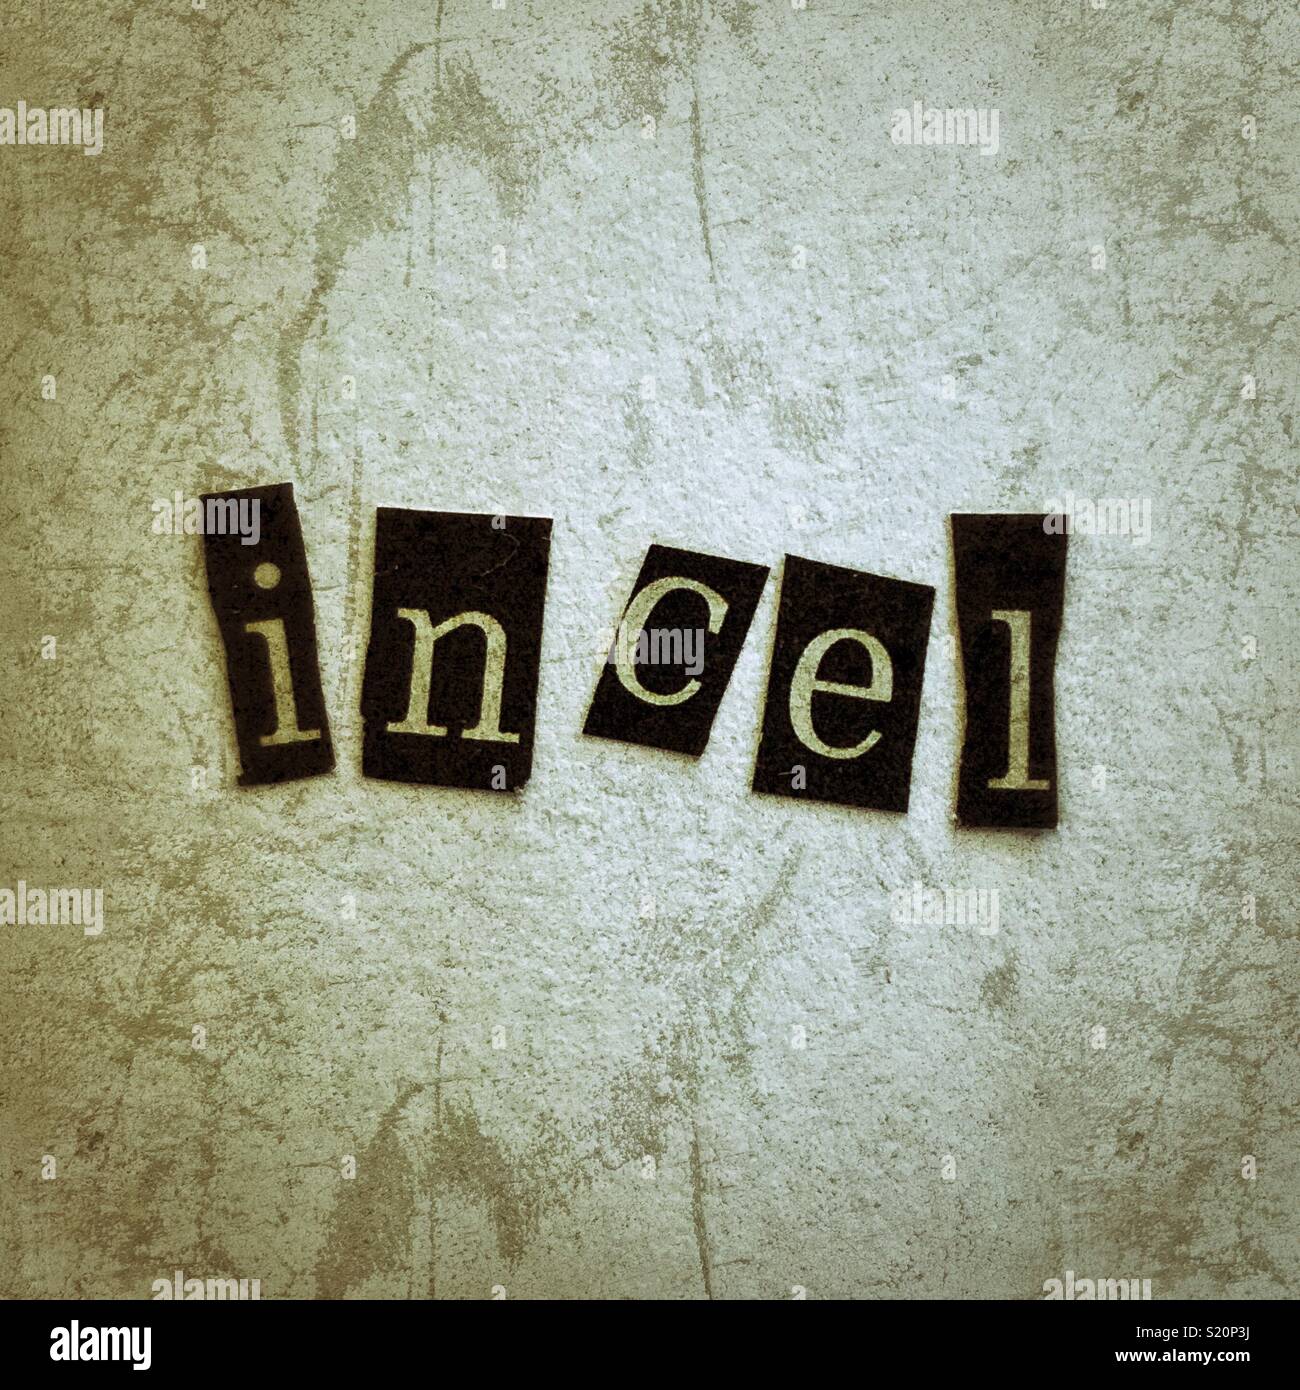 The word “incel”, which stands for involuntarily celibate, made with lowercase letters cut out of a magazine Stock Photo